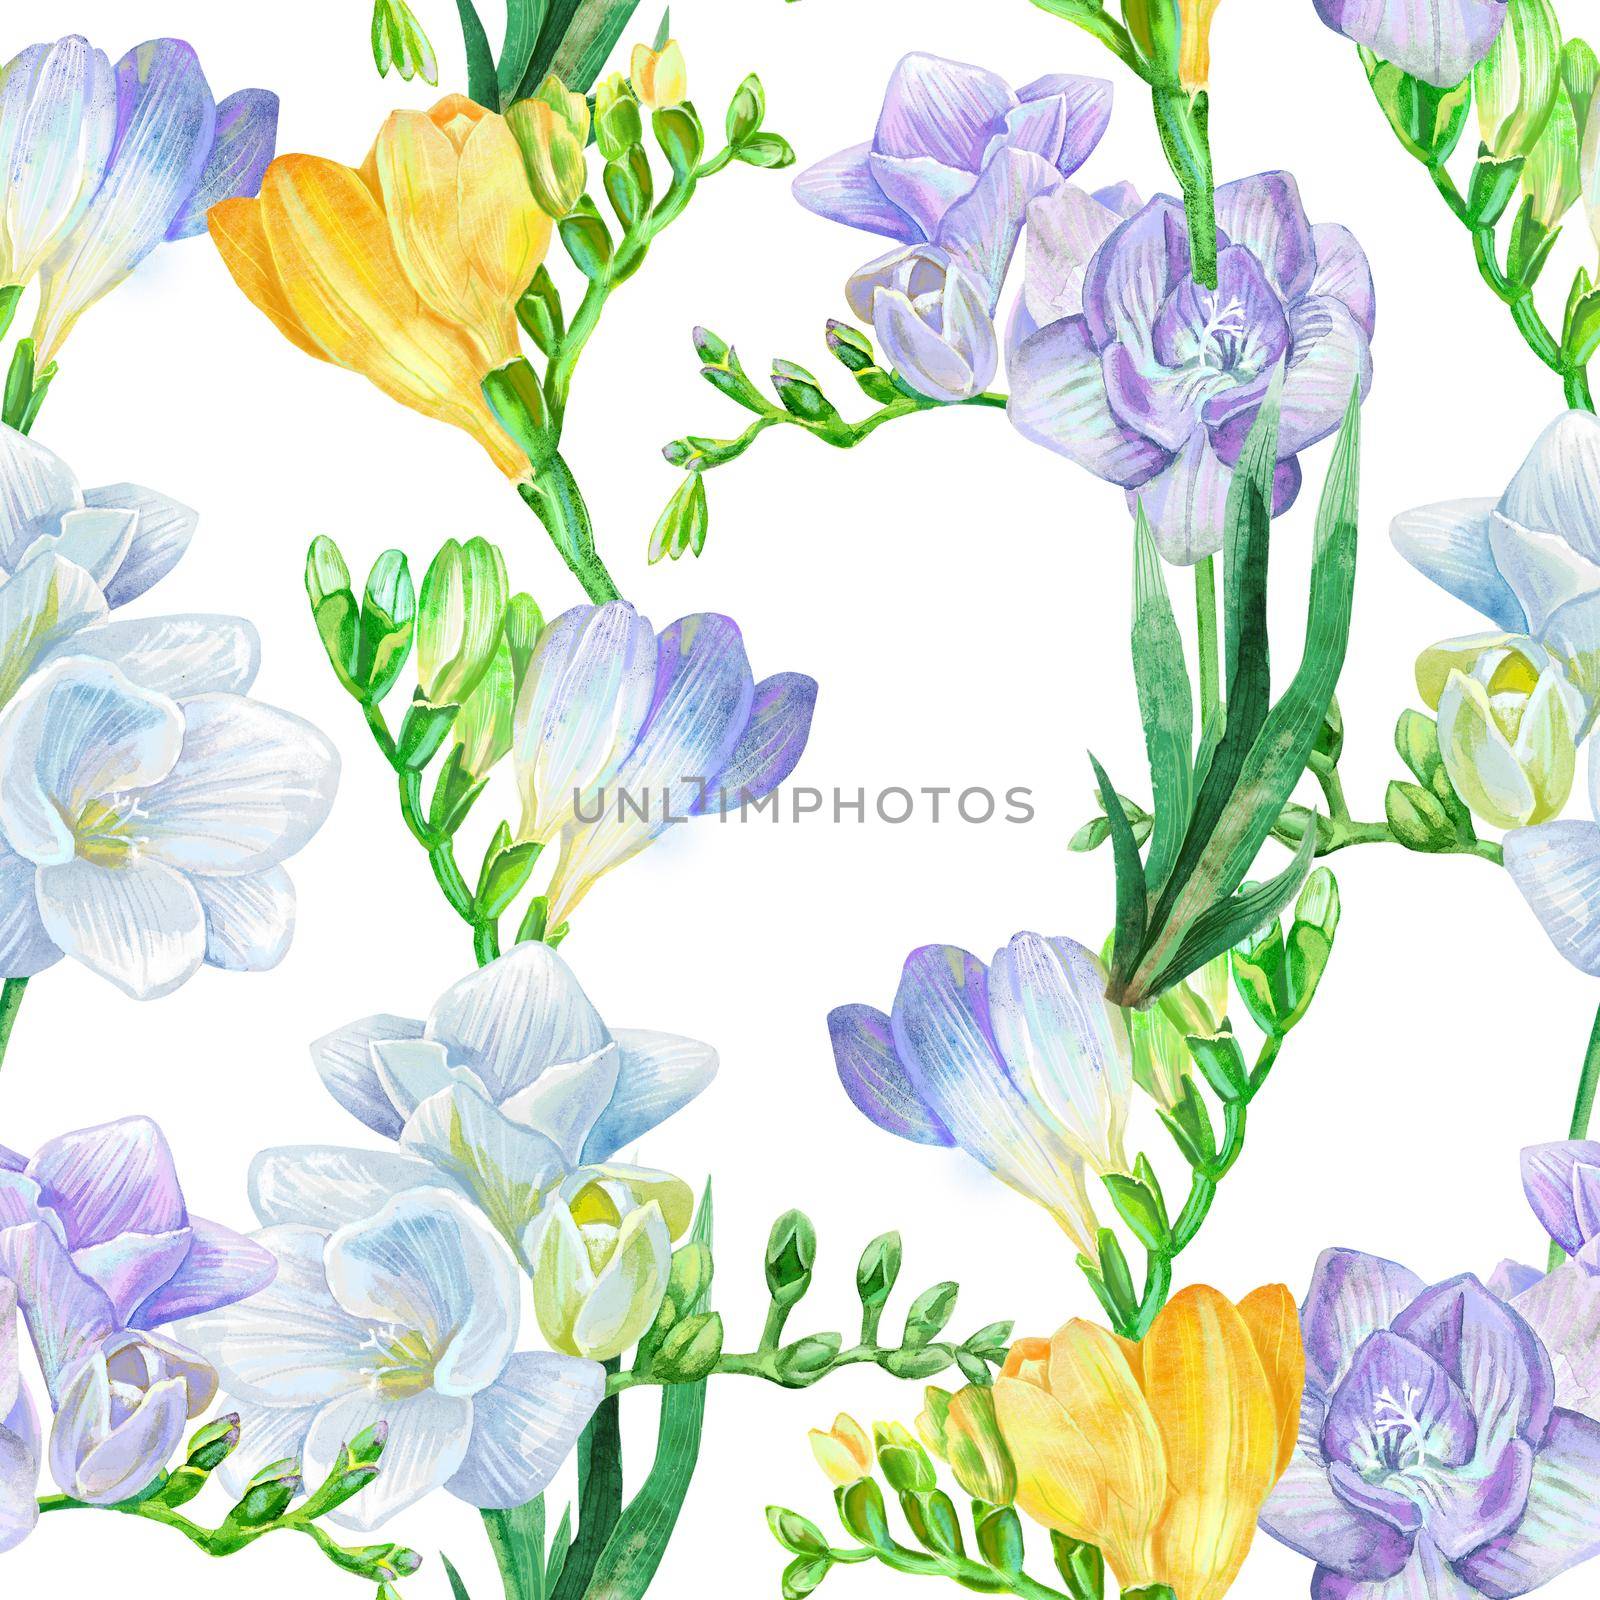 Seamless background pattern with freesia. Fabric wallpaper print texture. Aquarelle wildflower for background, texture, wrapper pattern, frame or border.